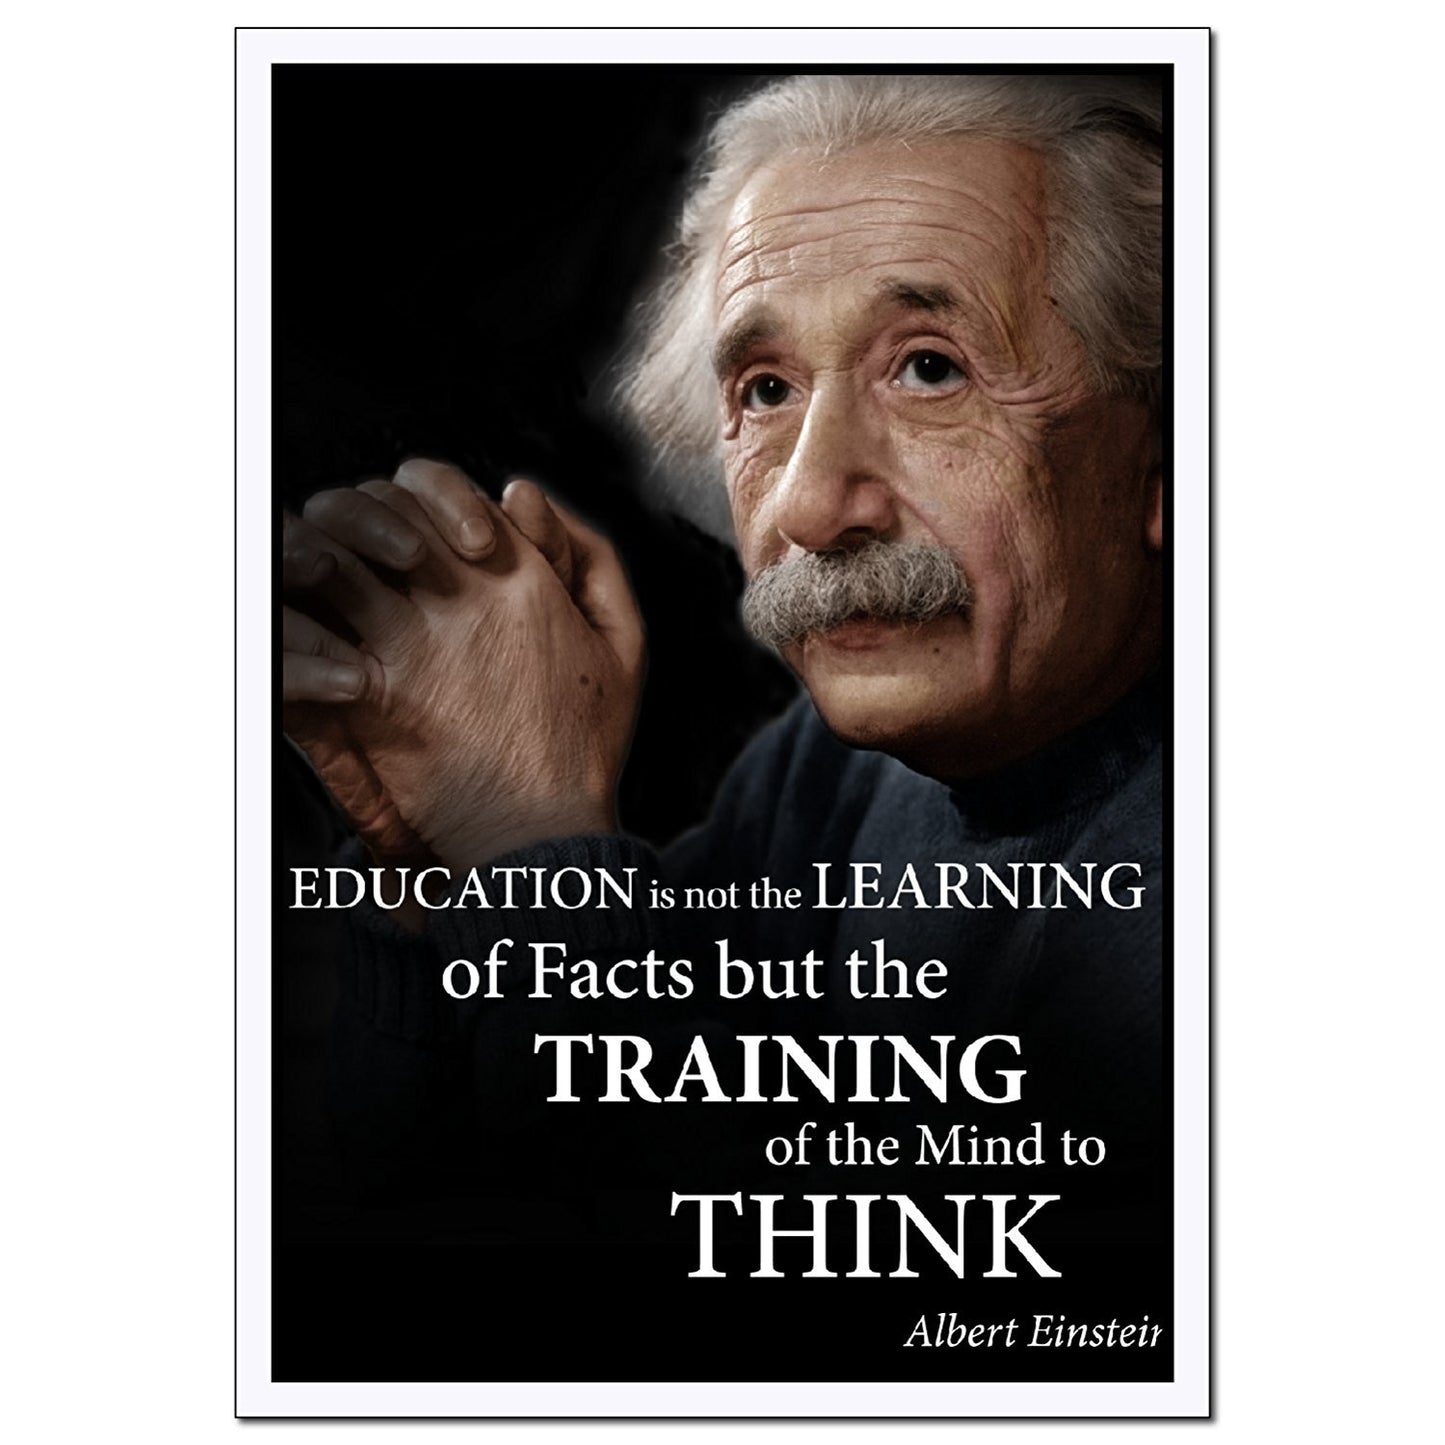 Albert Einstein education portrait poster quote print wall art - Young N' Refined